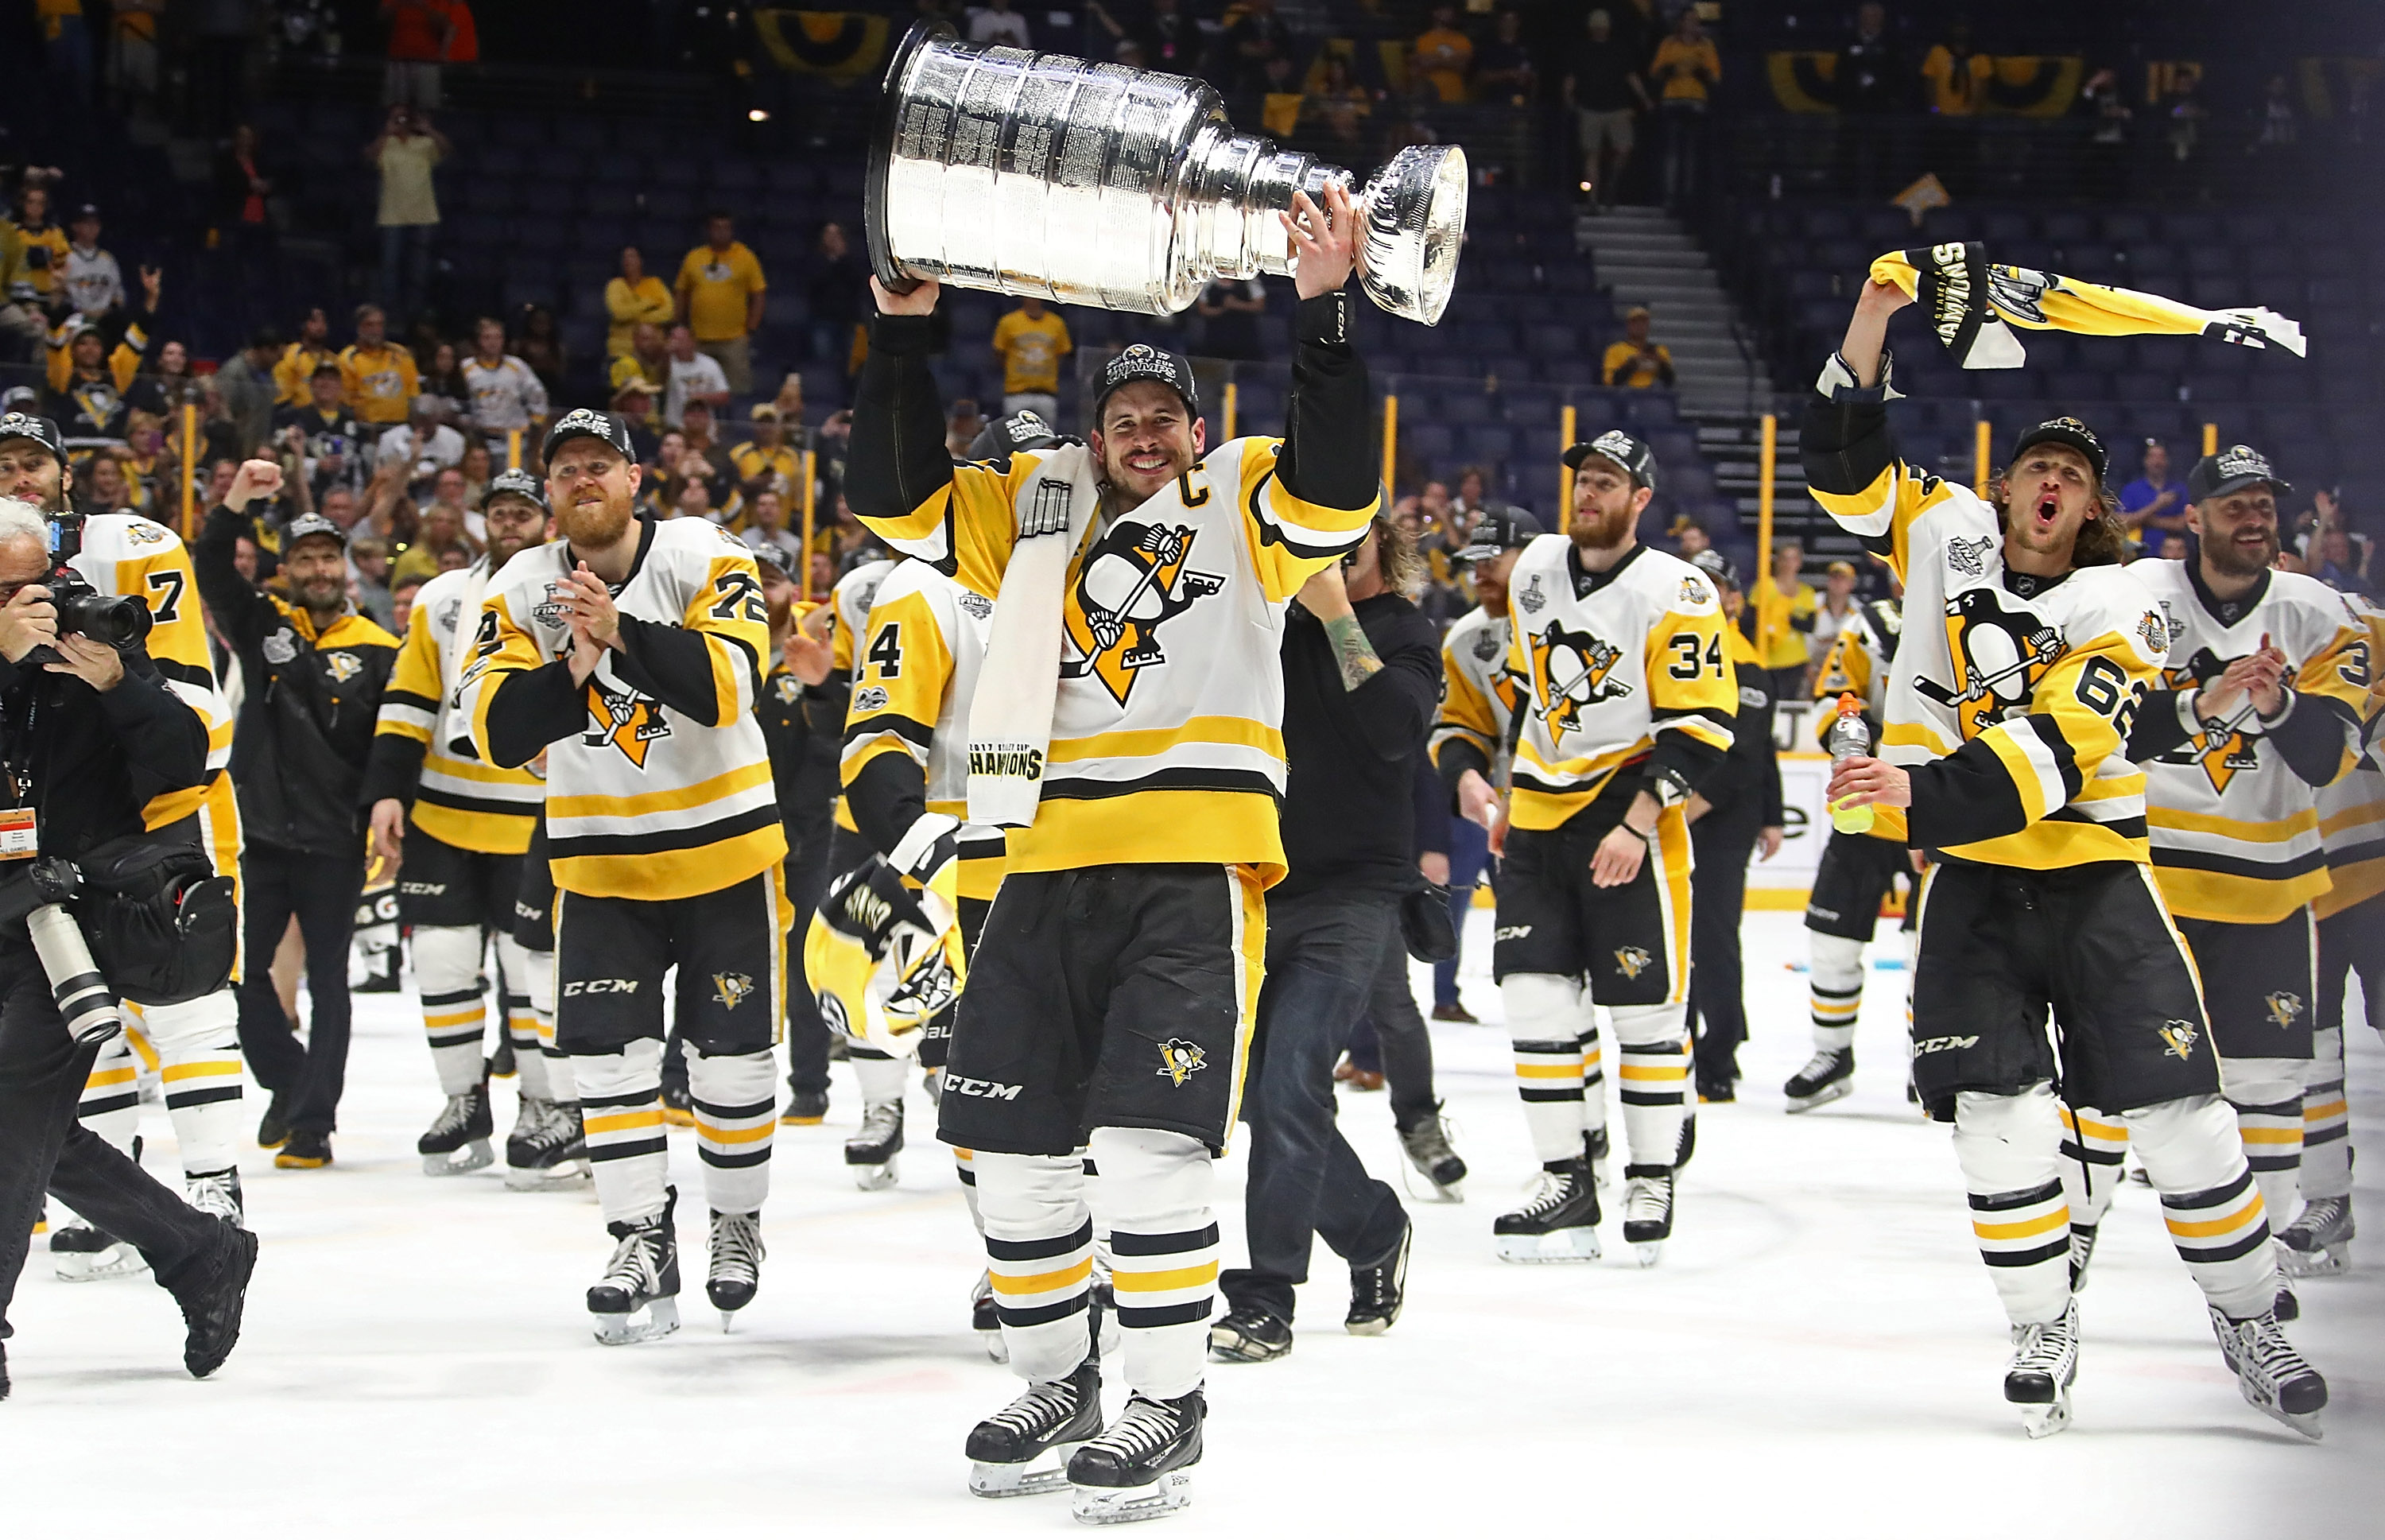 Sidney Crosby #87 of the Pittsburgh Penguins and his teammates celebrate with the Stanley Cup trophy after defeating the Nashville Predators 2-0 in Game Six of the 2017 NHL Stanley Cup Final at the Bridgestone Arena on June 11, 2017 in Nashville, Tennessee. (Frederick Breedon&mdash;Getty Images)